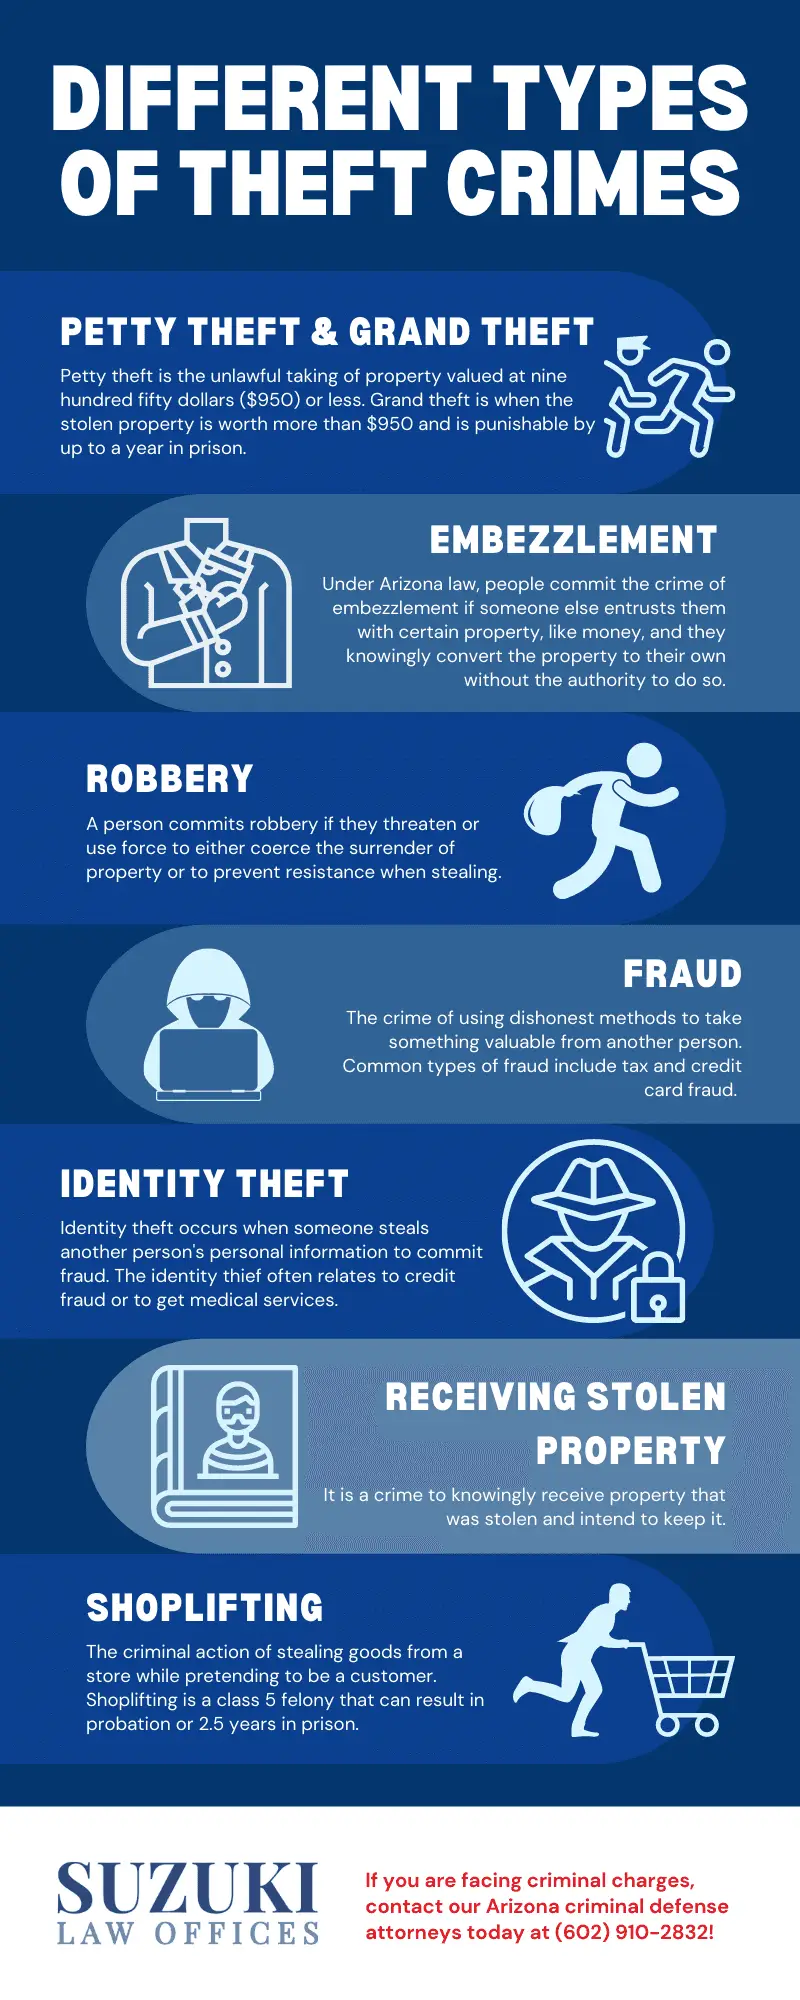 Different Types of Theft Crimes